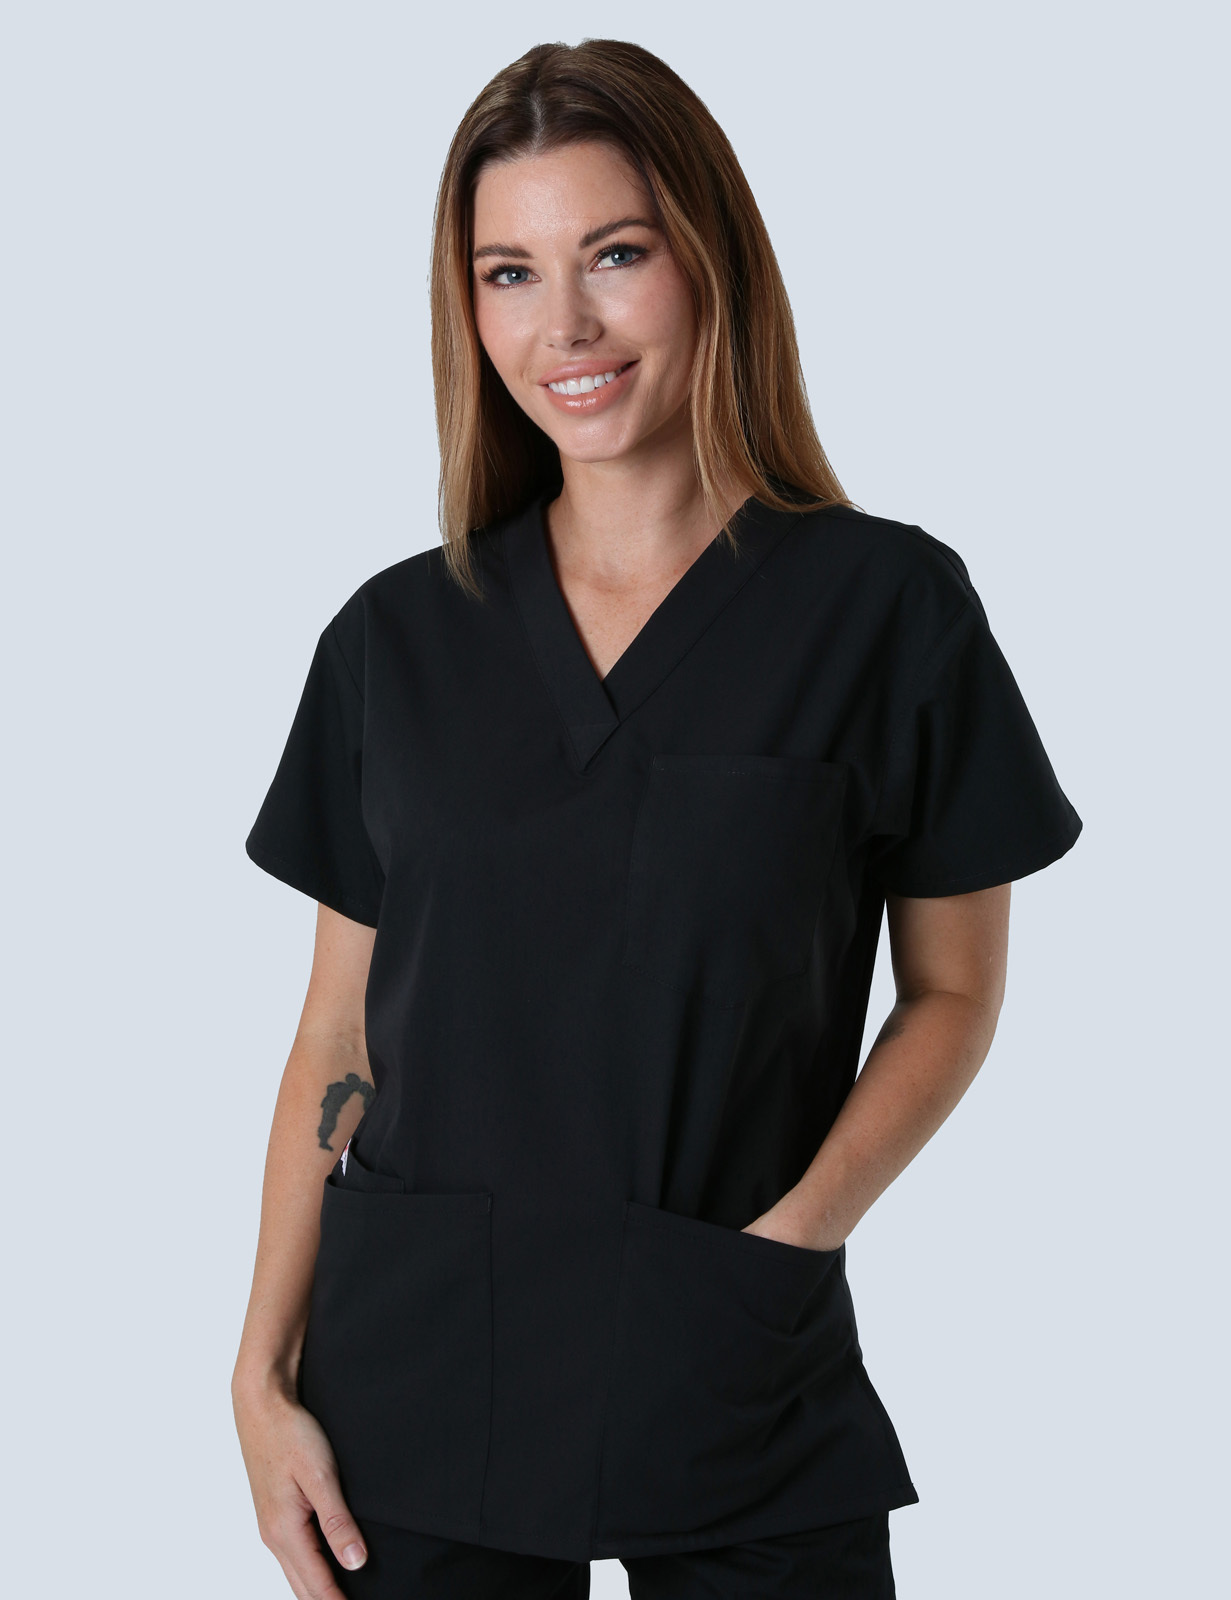 Toowoomba Hospital - ED Doctor (4 Pocket Scrub Top and Cargo Pants in Black incl Logos)